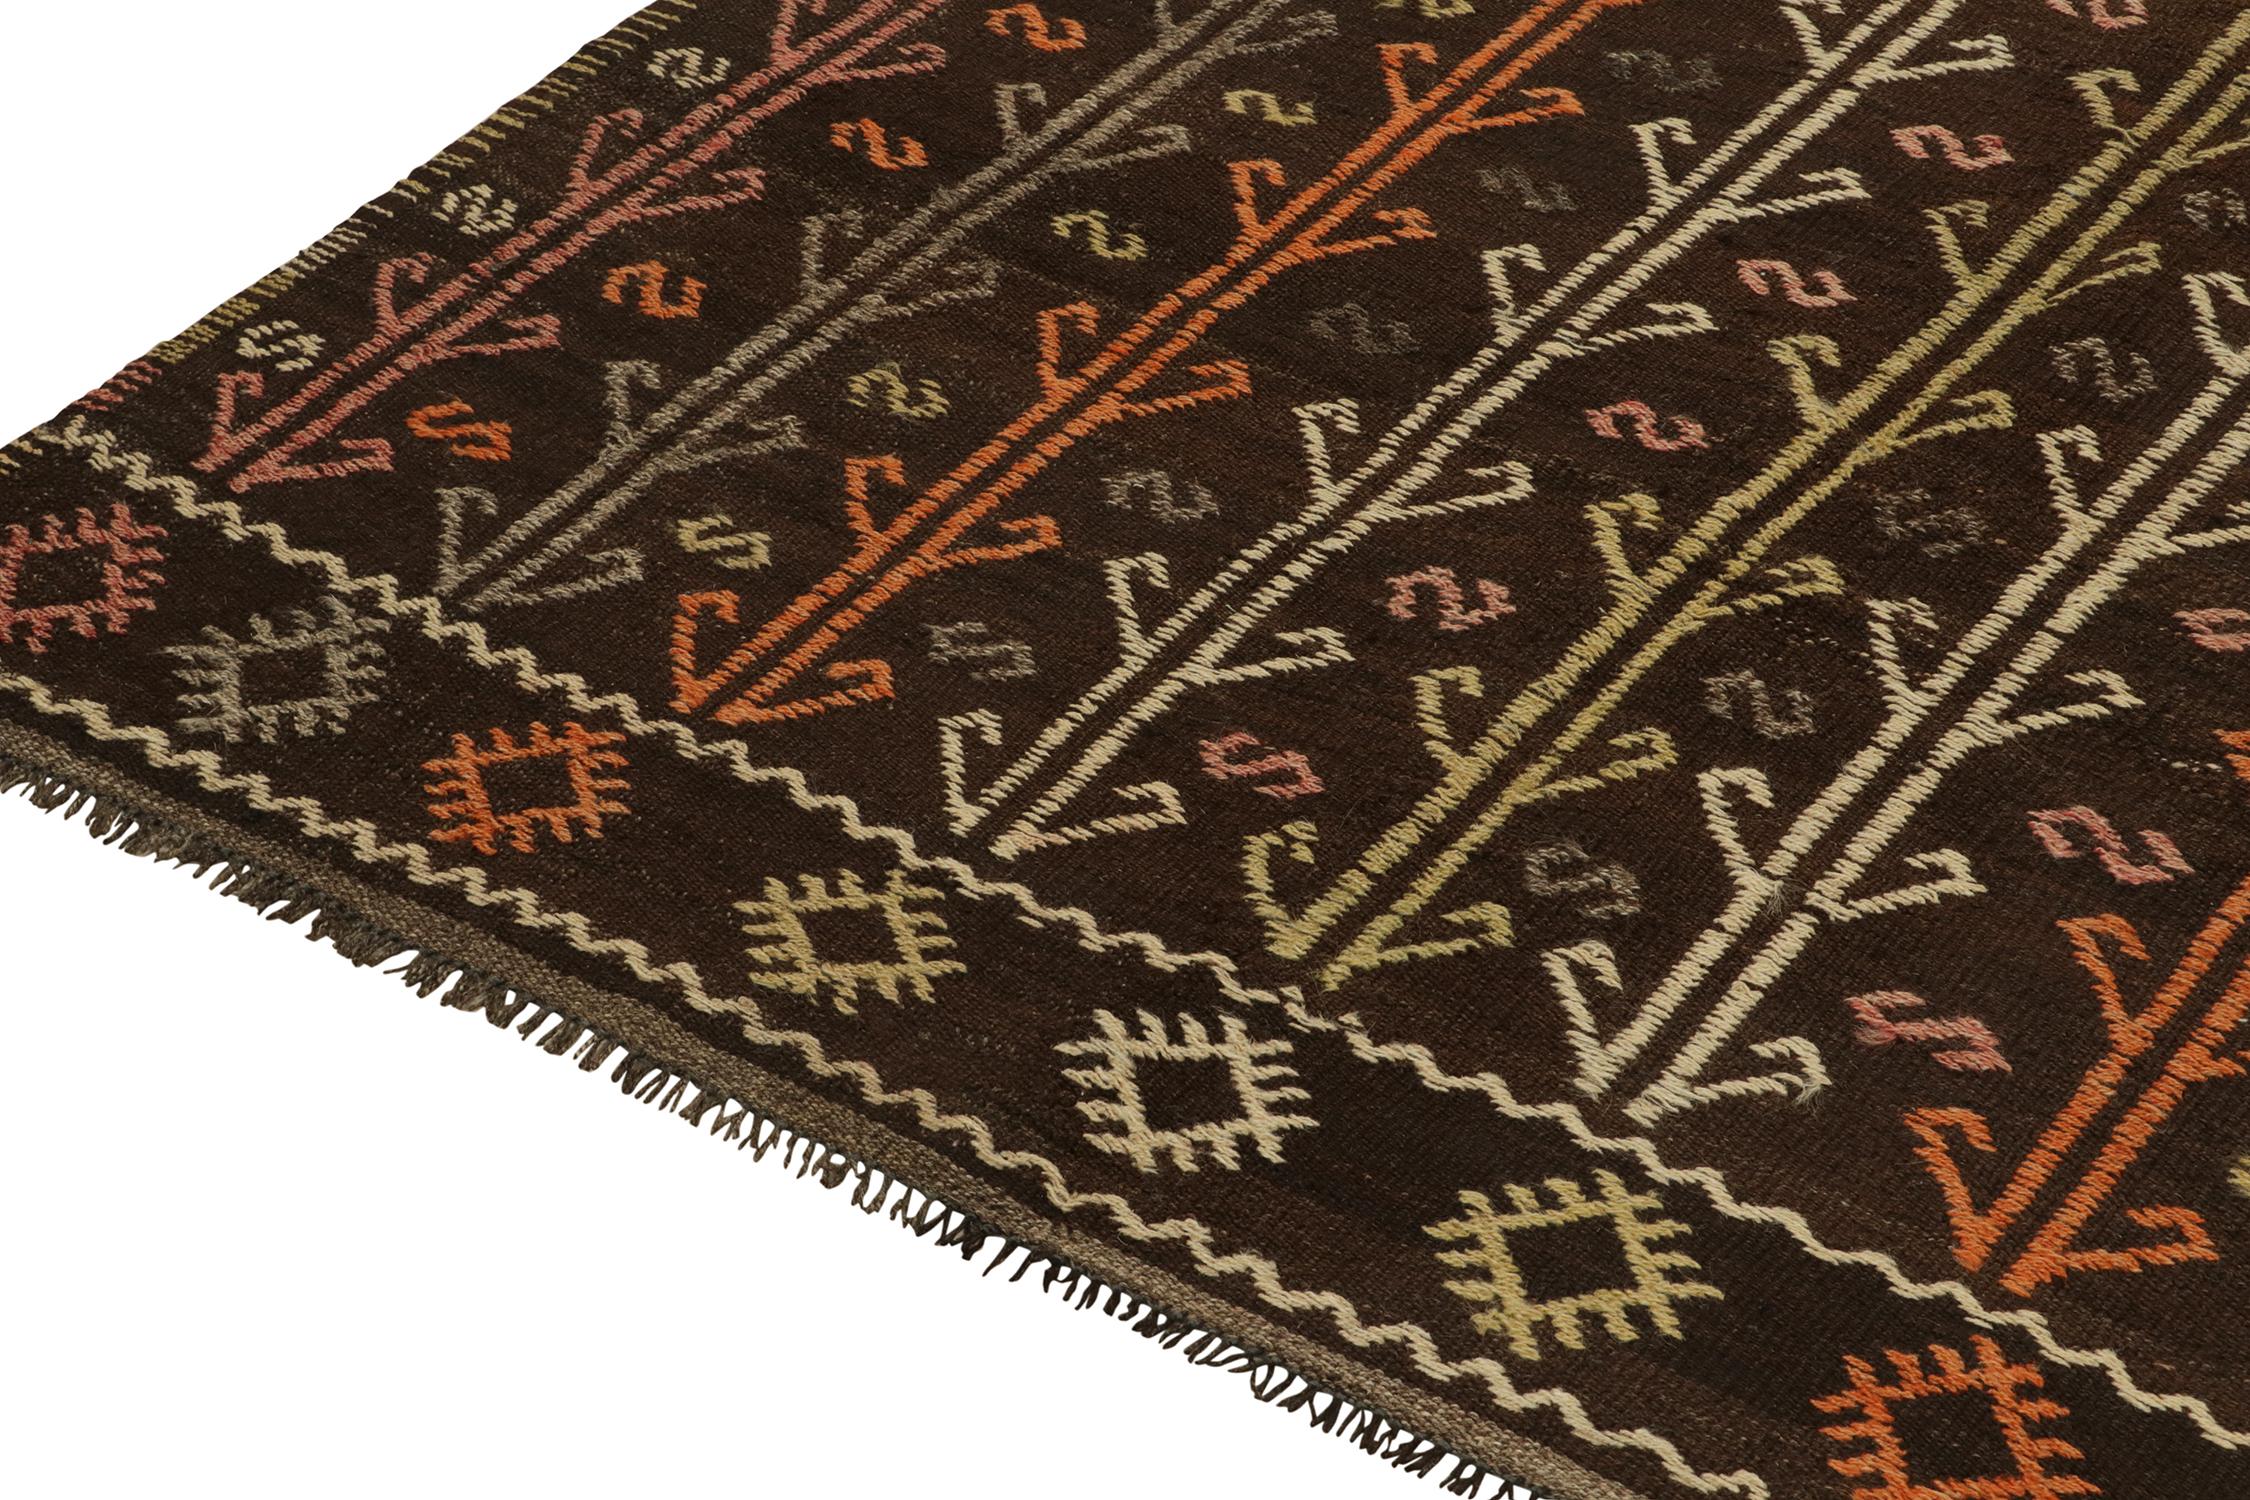 Vintage Chaput Style Kilim in Black, Orange, Grey Tribal Pattern by Rug & Kilim In Good Condition For Sale In Long Island City, NY